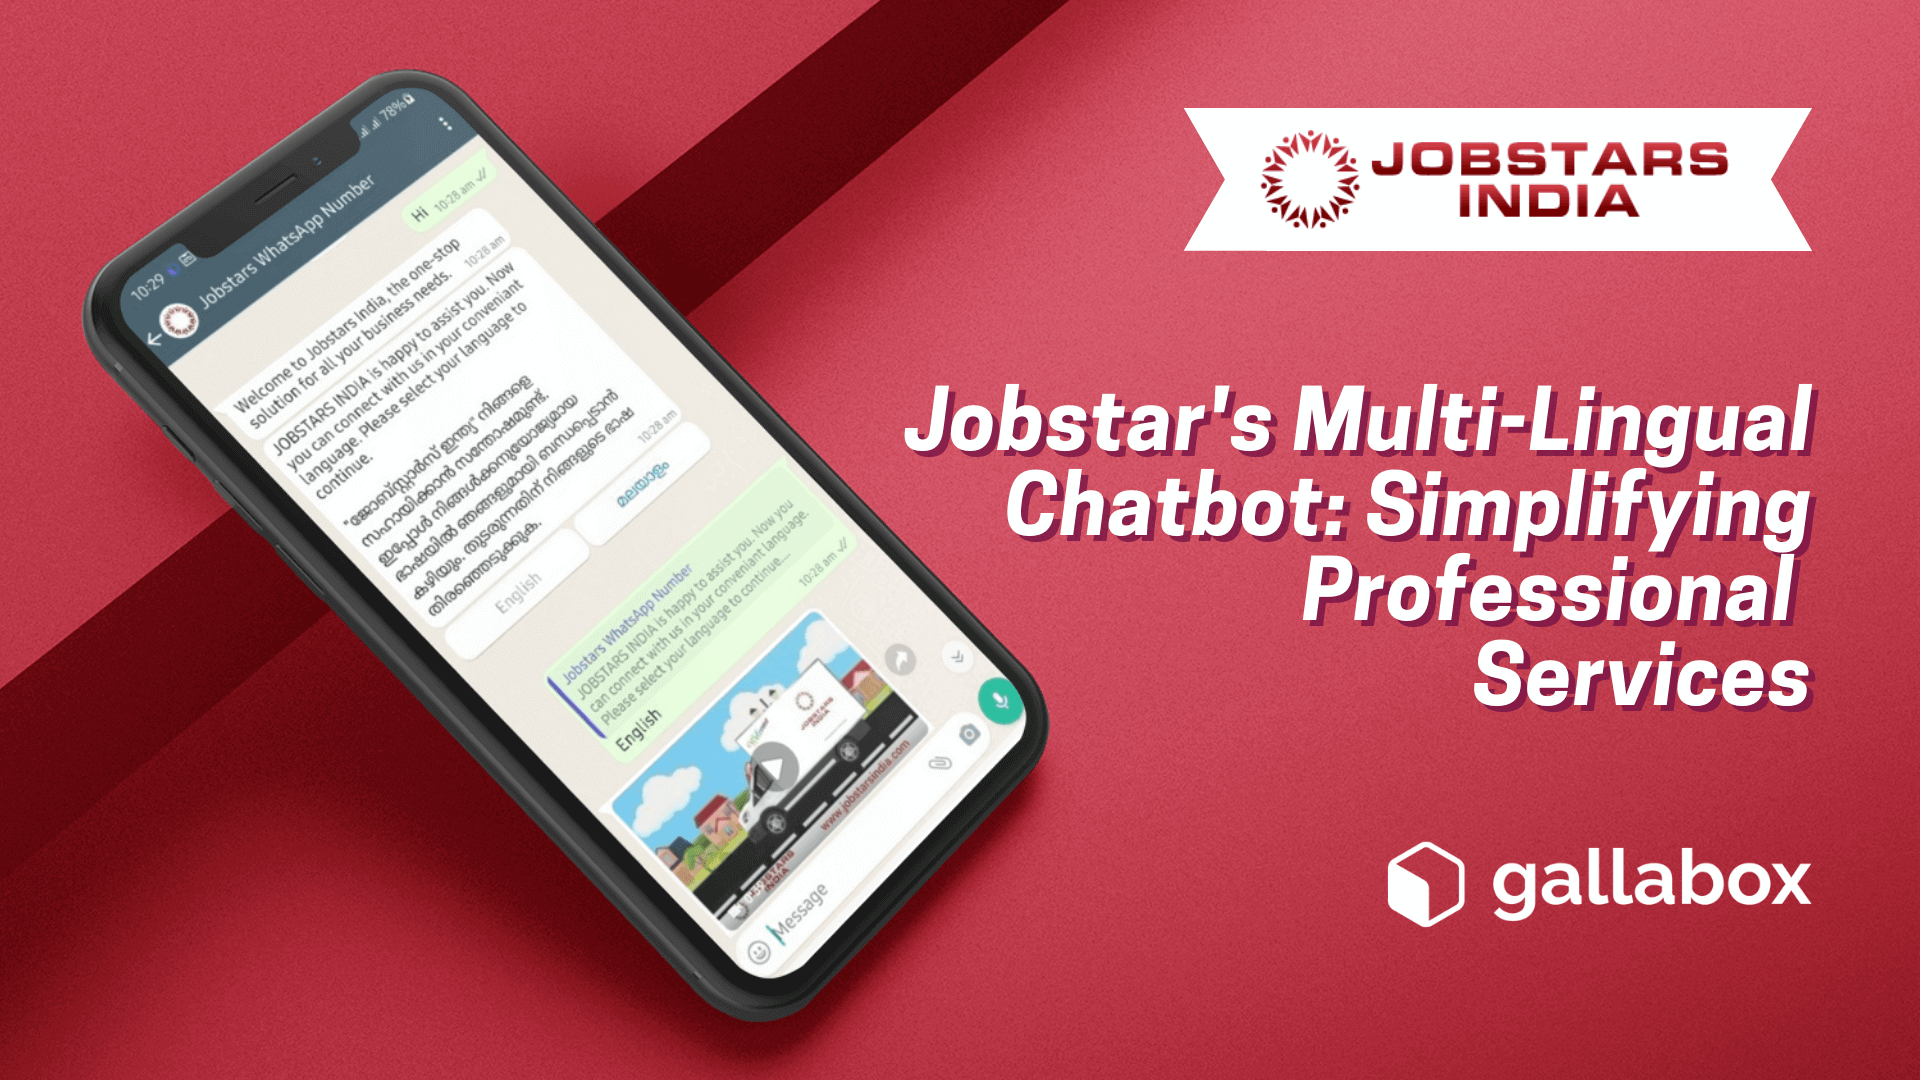 Jobstar's Multi-lingual WhatsApp Chatbot - Simplifying Professional Services